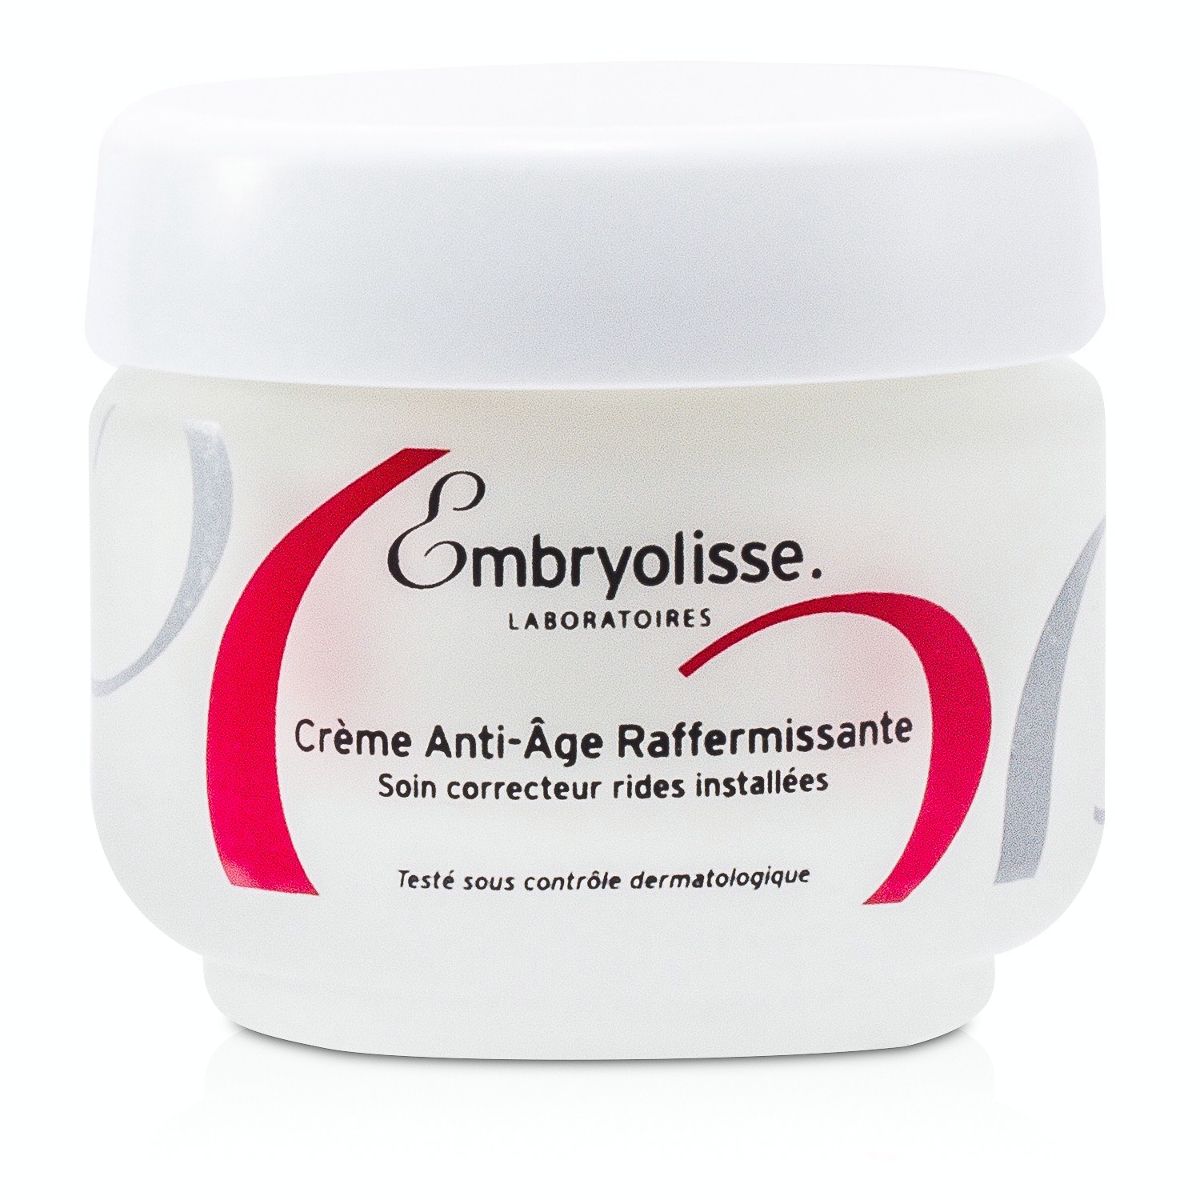 Anti-Age Firming Cream - All Skin Types 40+ (Unboxed) Embryolisse Image